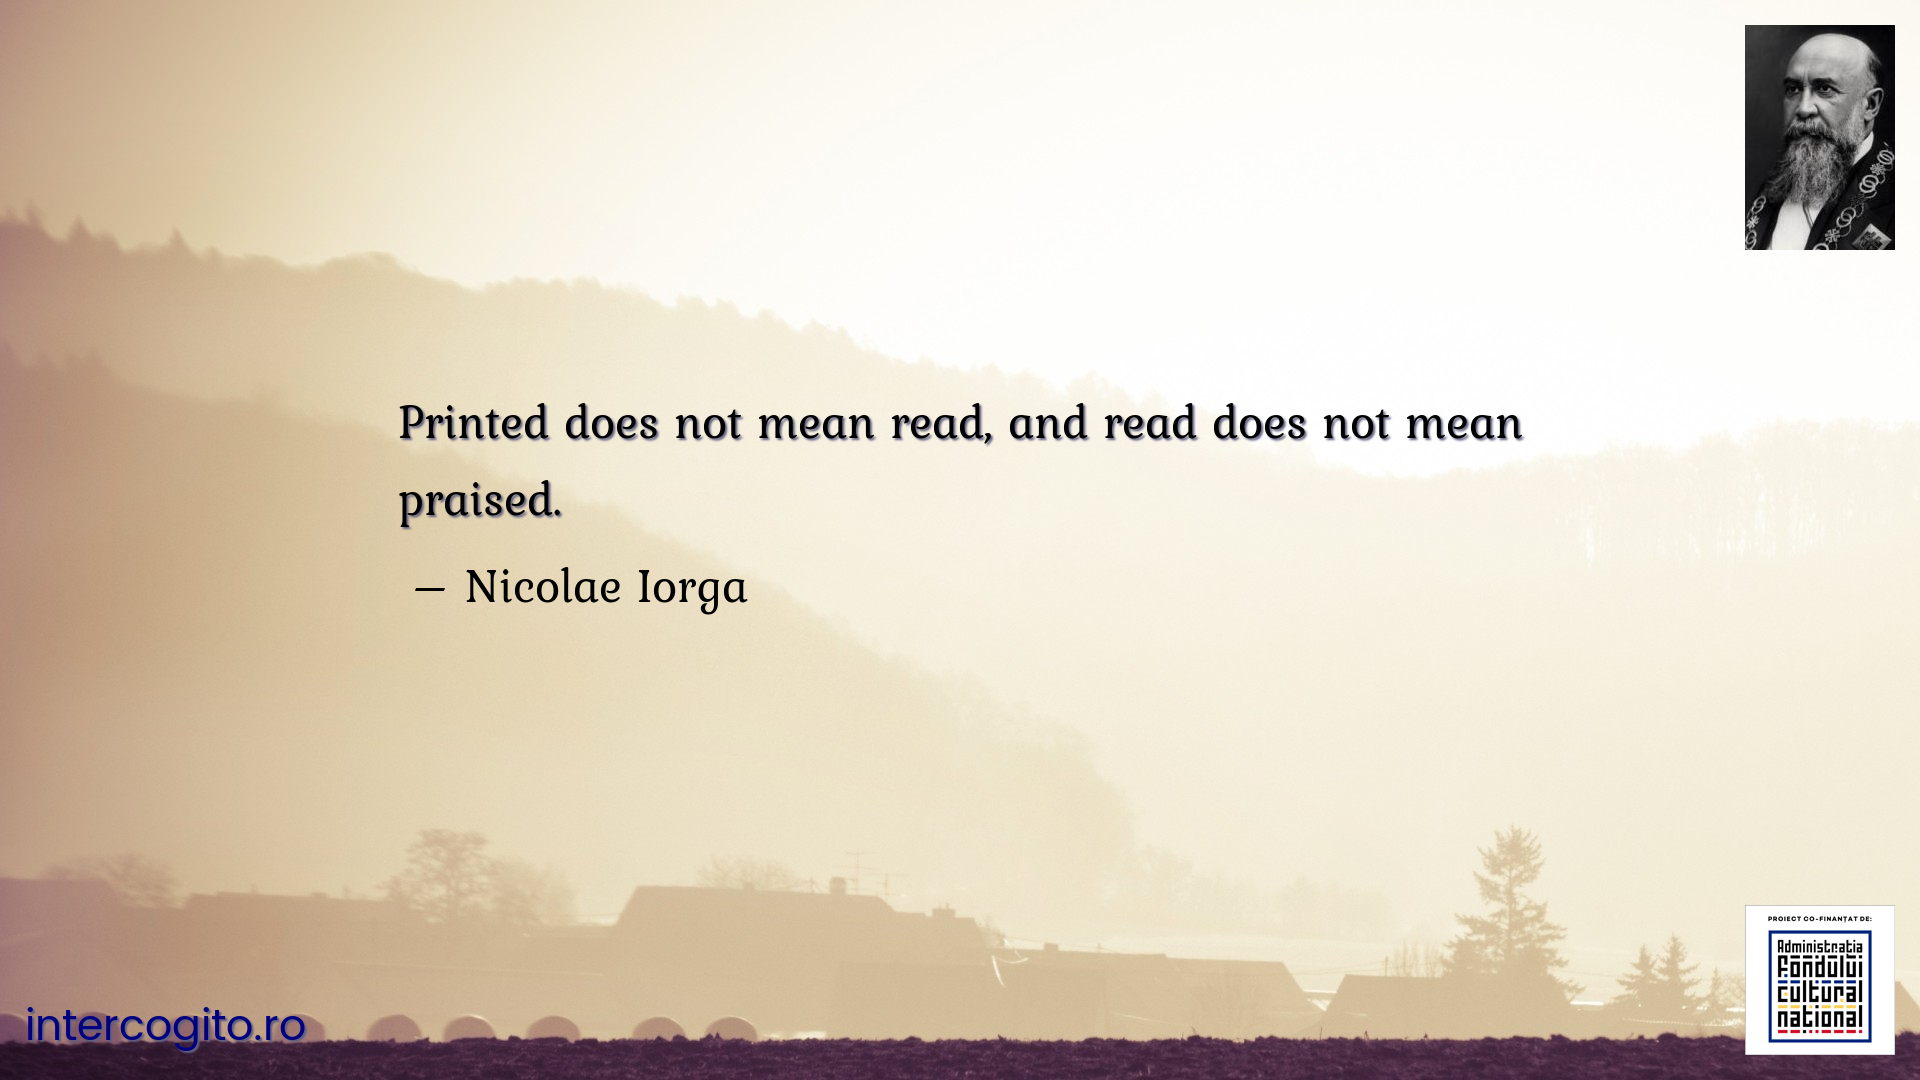 Printed does not mean read, and read does not mean praised.